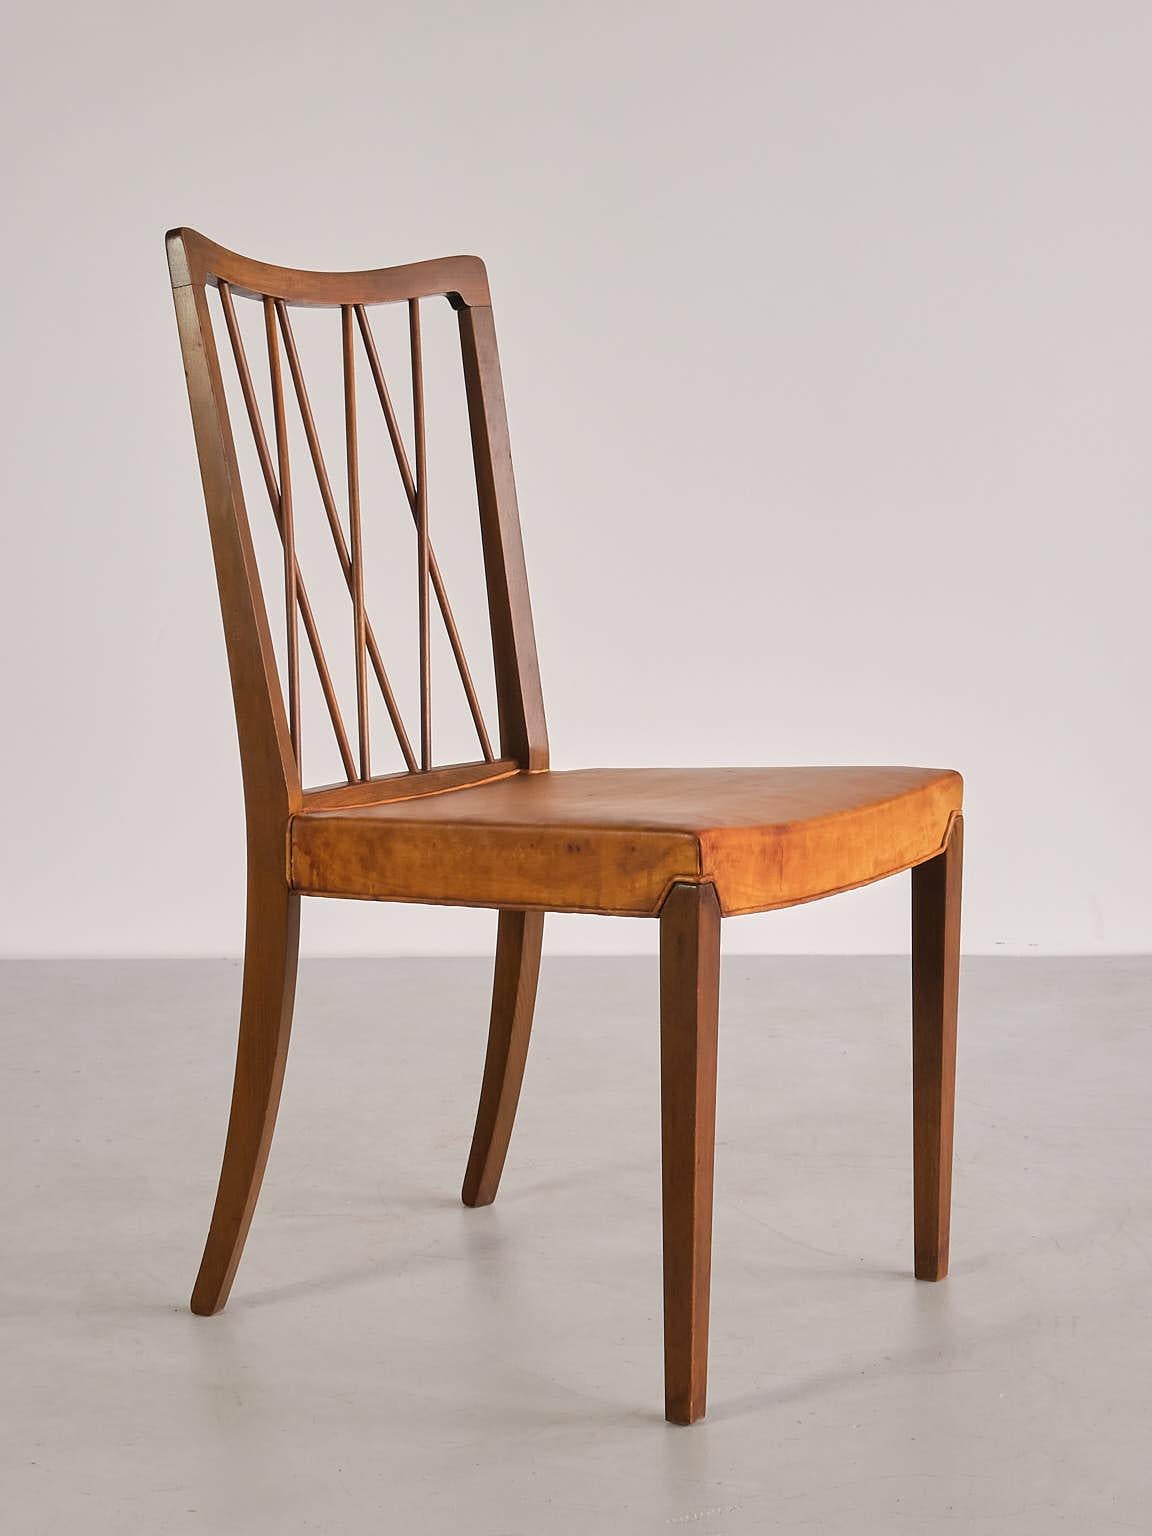 Set of Eight Frode Holm Dining Chairs, Walnut and Leather, Illum, Denmark, 1940s For Sale 9